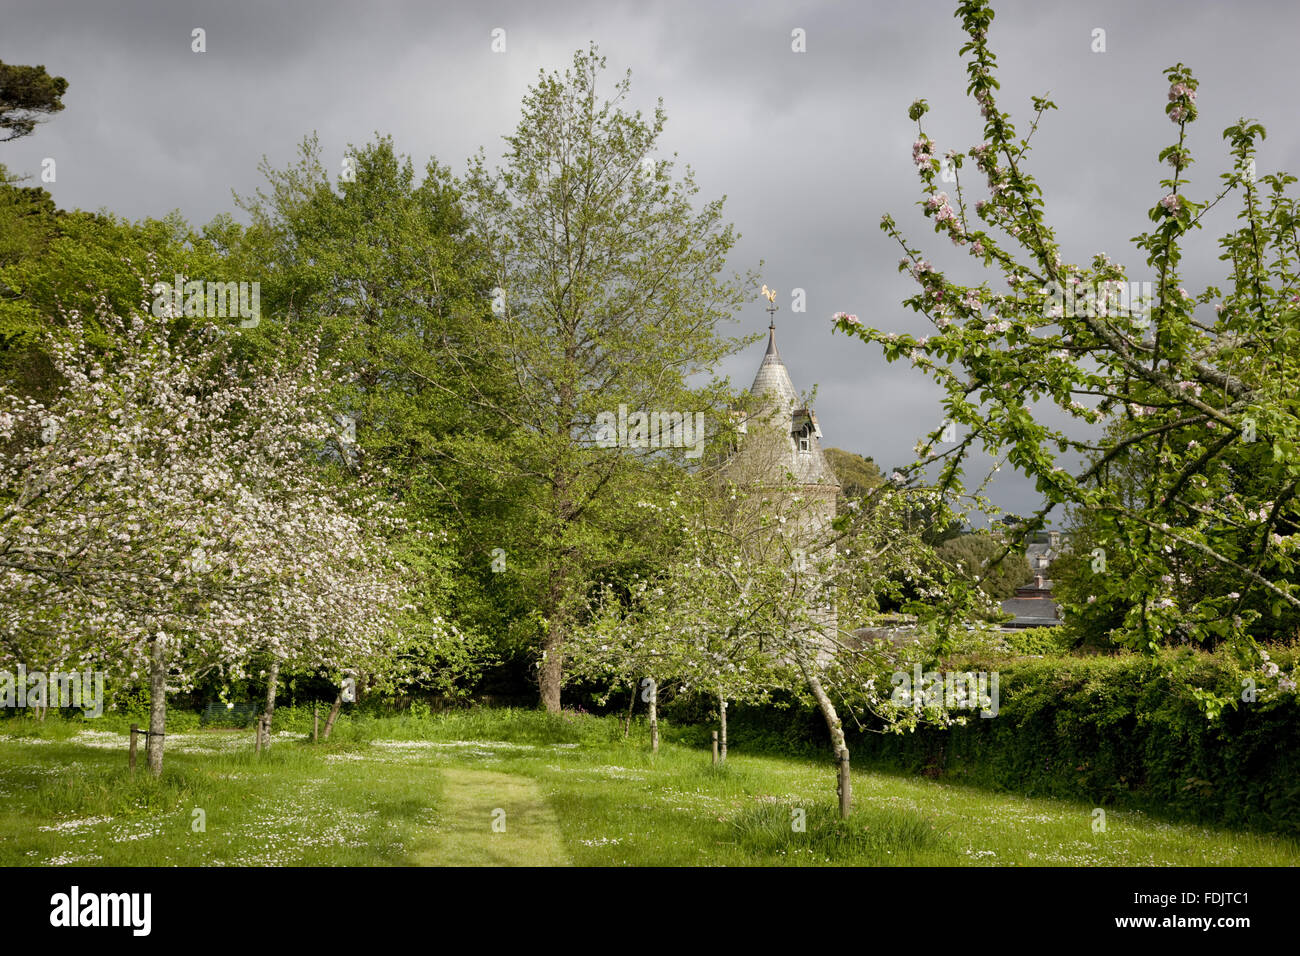 The Orchard with fruit trees in blossom at Trelissick Garden, Cornwall, in May. Stock Photo